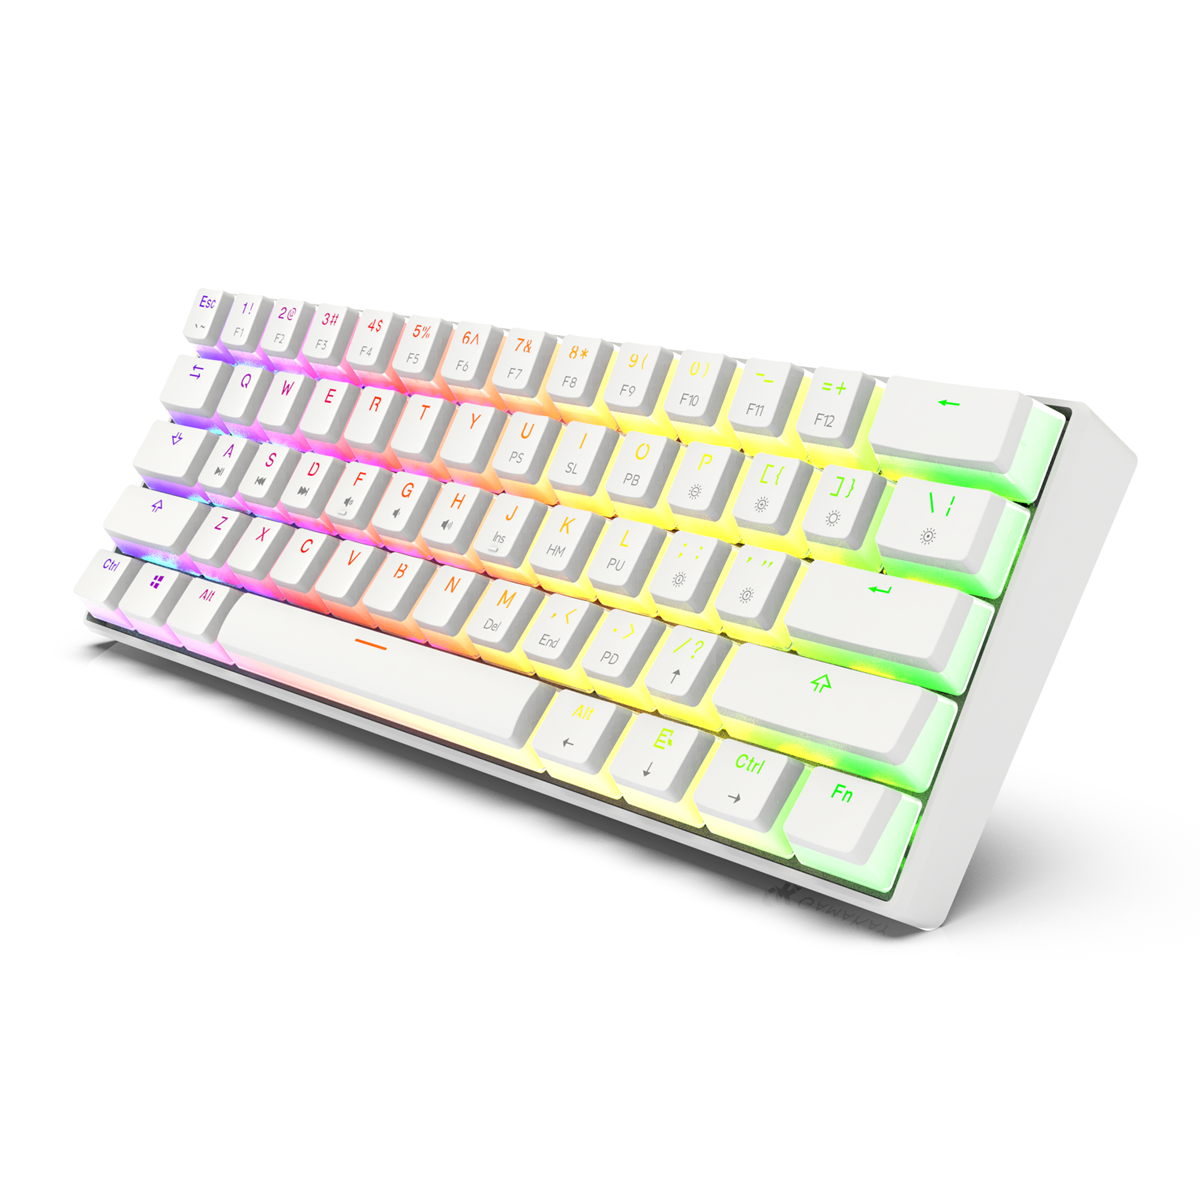 Gamakay MK61 Wired Mechanical Keyboard Gateron Optical Switch Pudding Keycaps RGB 61 Keys Hot Swappable Gaming Keyboard New Version 5